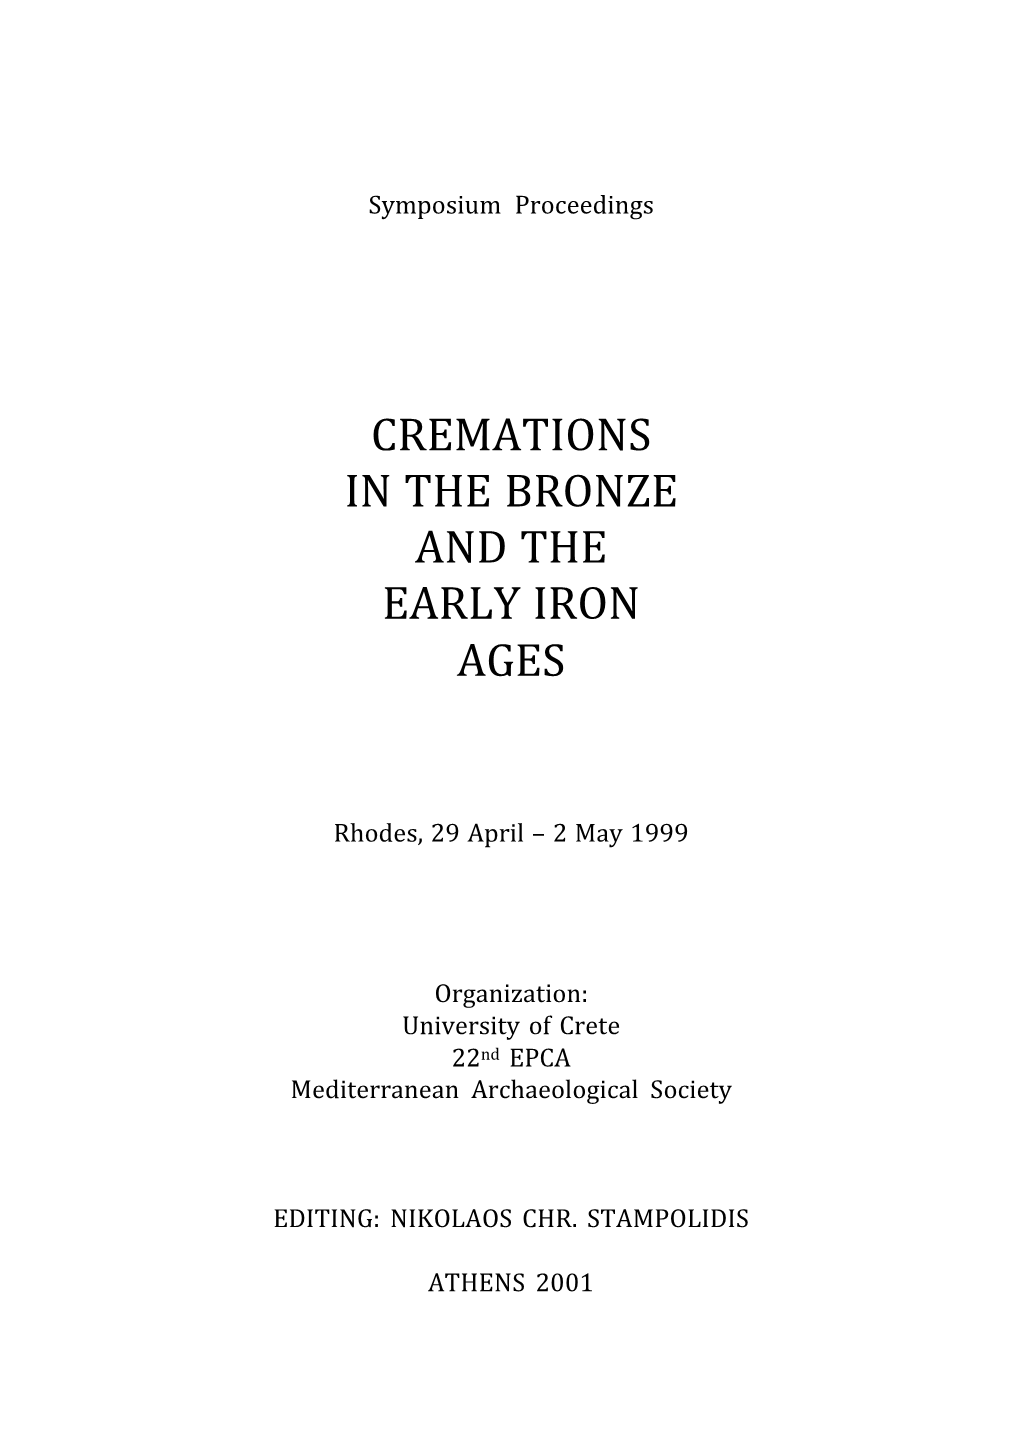 Cremations in the Bronze and the Early Iron Ages